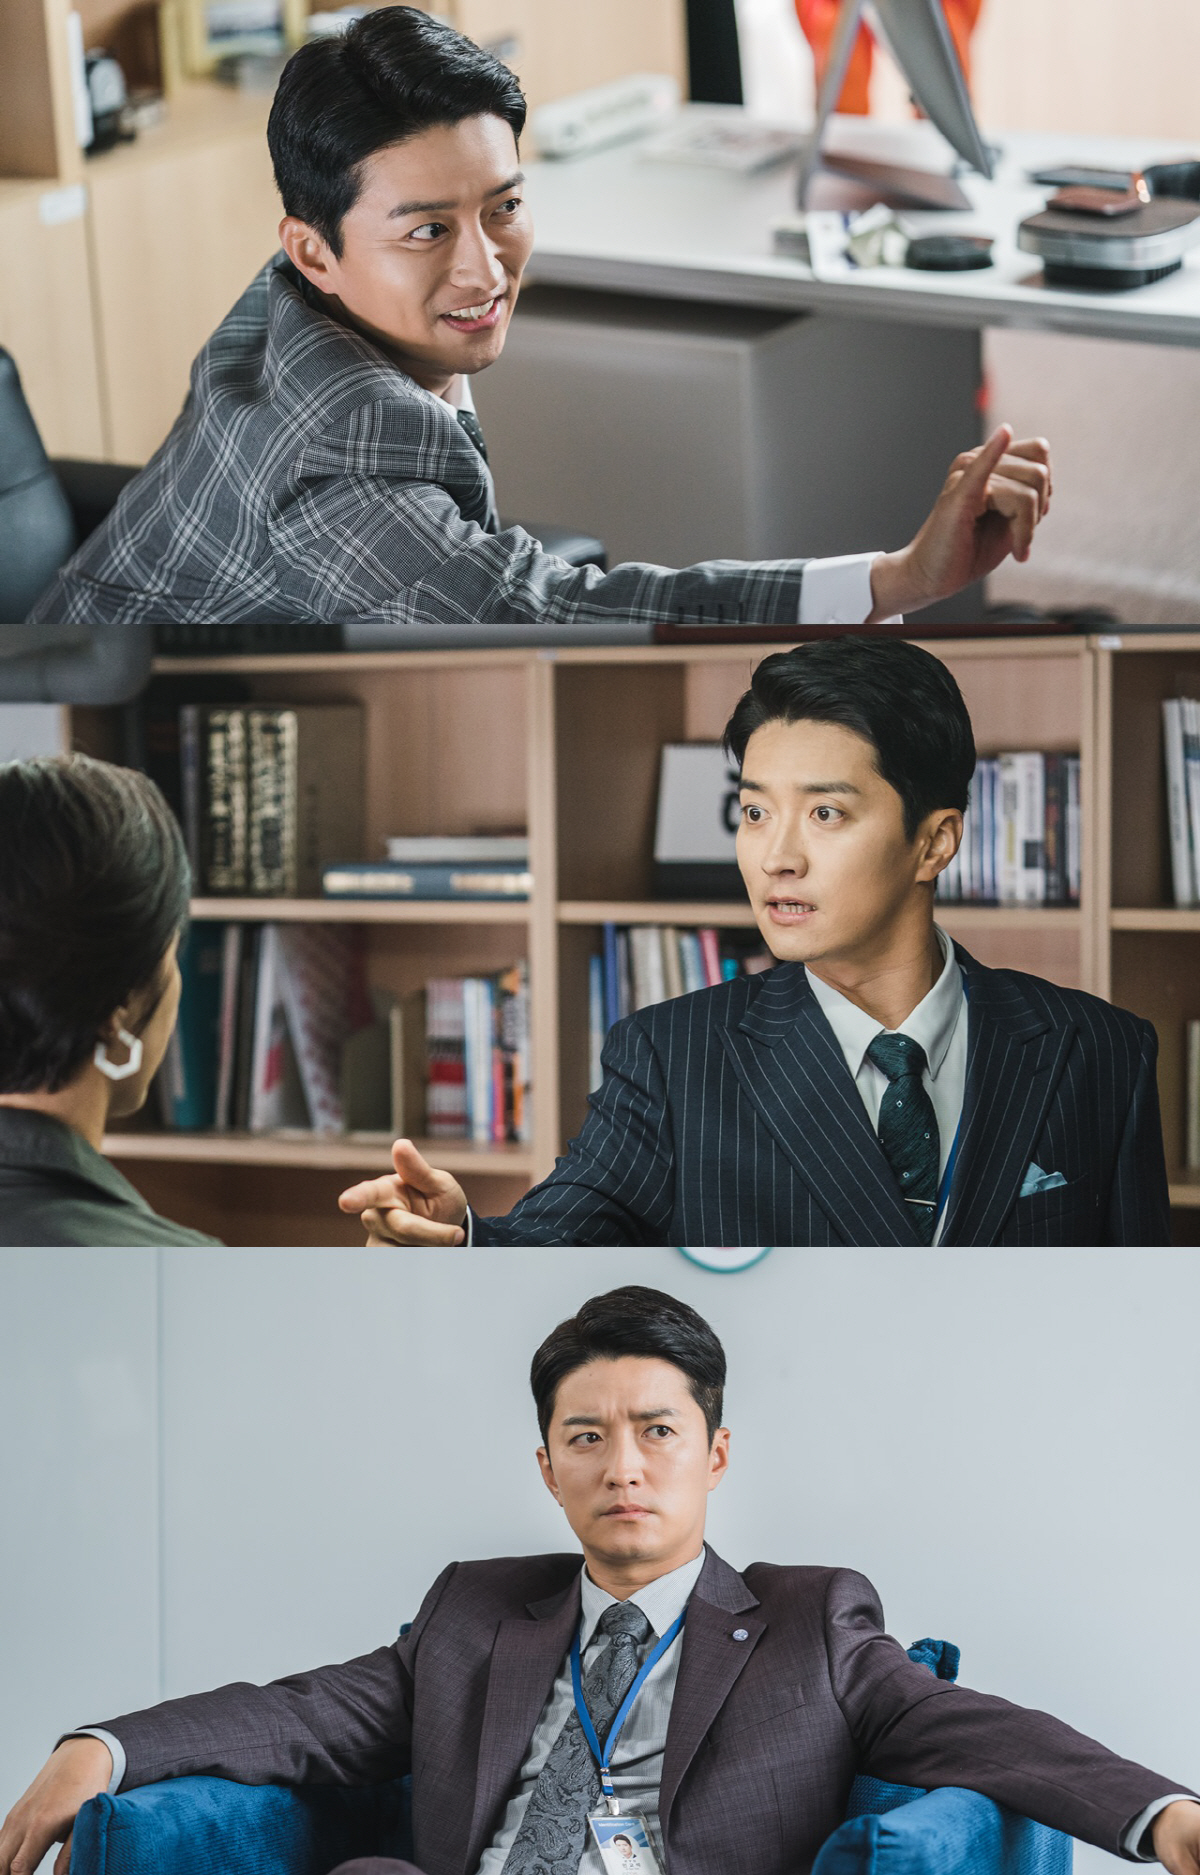 Actor In Gyo-jin stars in Hes the Guy SEKKBS 2TVs new Mon-Tue drama He Is He (directed by Choi Yoon-seok, Lee Ho/playplay by Lee Eun-young/produced Aiwill Media), which will be broadcasted at 9:30 pm on July 6th (Month), will be held as a non-marriage woman who became a non-marriage watcher receives a dash of two men because of her three previous lifes He Its a romantic comedy drama.In Gyo-jin is divided into the role of General Manager of the Mytoon Webtoon Division.He will check out Seo Hyun-joo (Hwang Jung-eum), a talented webtoon PD who he scouted, and make the drama more exciting with Tikitaka, which has no concessions.In the meantime, SteelSeries with various expressions of In Gyo-jin are revealed and attract attention.From the full appearance of the young finger to the look of the seriousness, the face in the embarrassment, the face of the character of the human figure is expressed in detail, raising the expectation of the drama.In this way, In Gyo-jin is playing a role of the new SteelSeries, radiating the charm of reversal between joy and seriousness.He is interested in what kind of appearance he will play, and what kind of chemistry he will show with Hwang Jung-eum.In Gyo-jins performance, which will catch the attention of viewers with his acting performance, can be seen on KBS 2TVs new Mon-Tue drama Hes the Guy which is broadcasted at 9:30 pm on Monday, July 6.Photo Offering: Aiwill Media